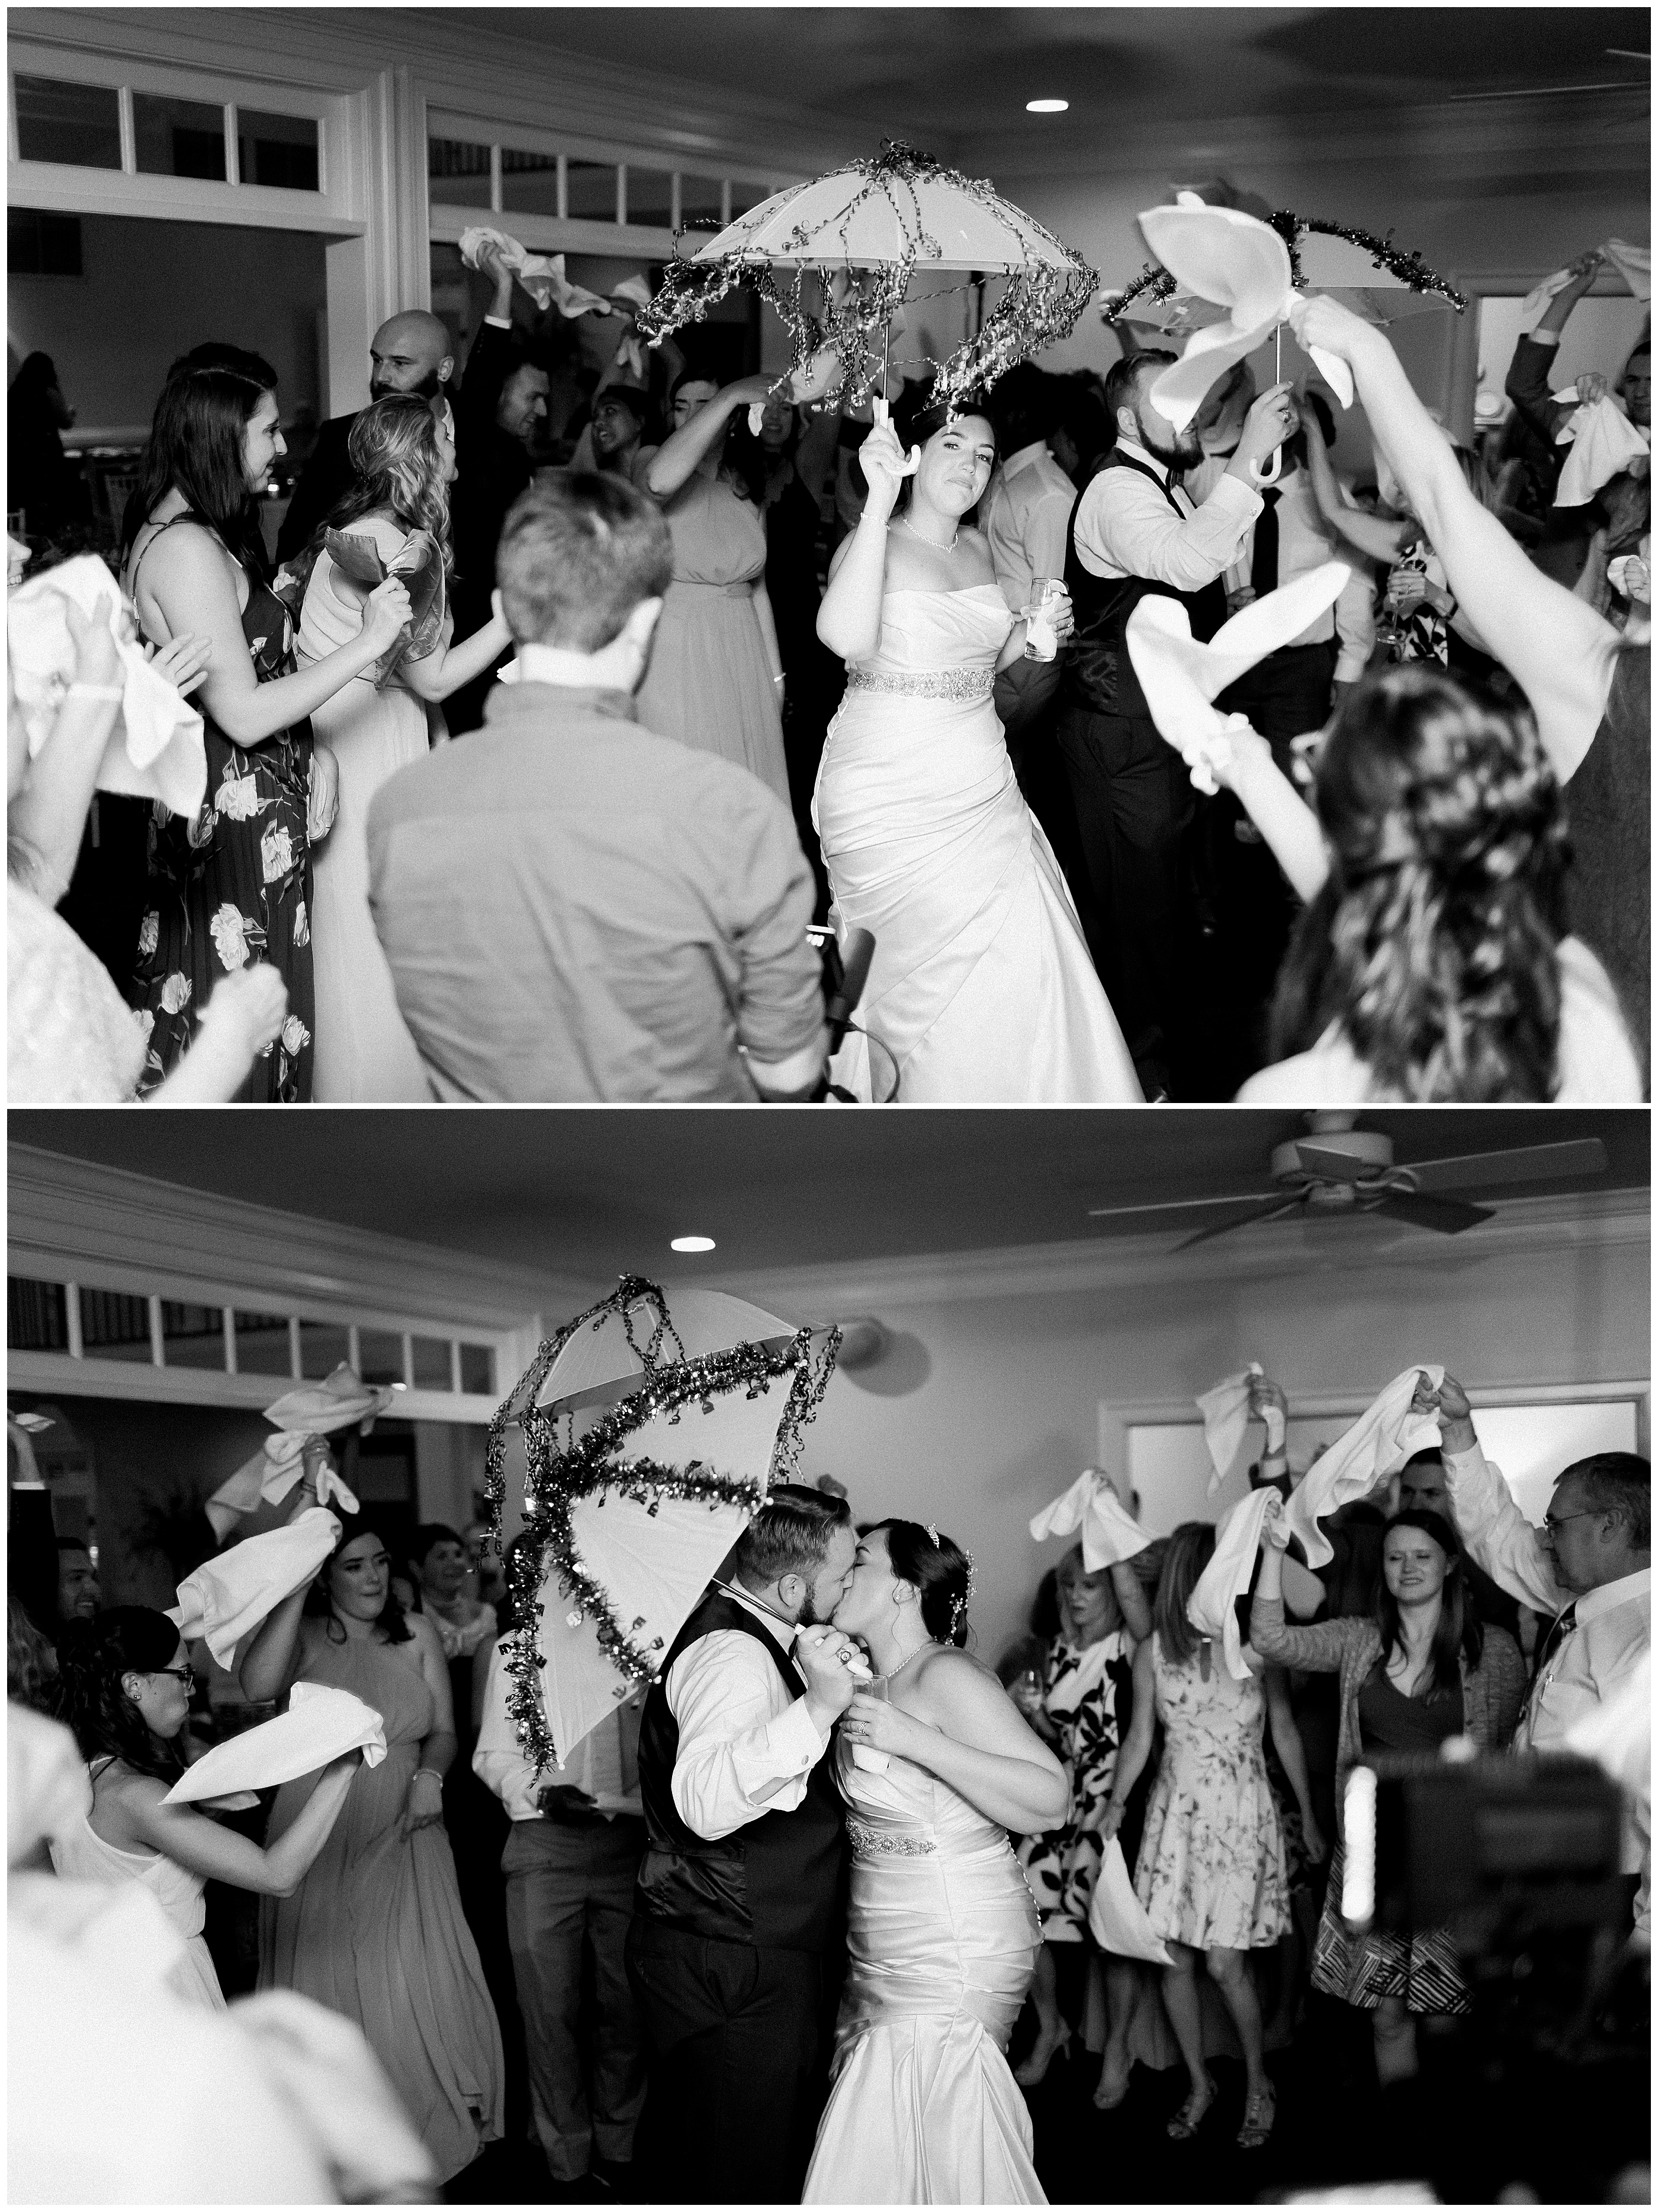 Second Line at wedding. Luke and Ashley Photography